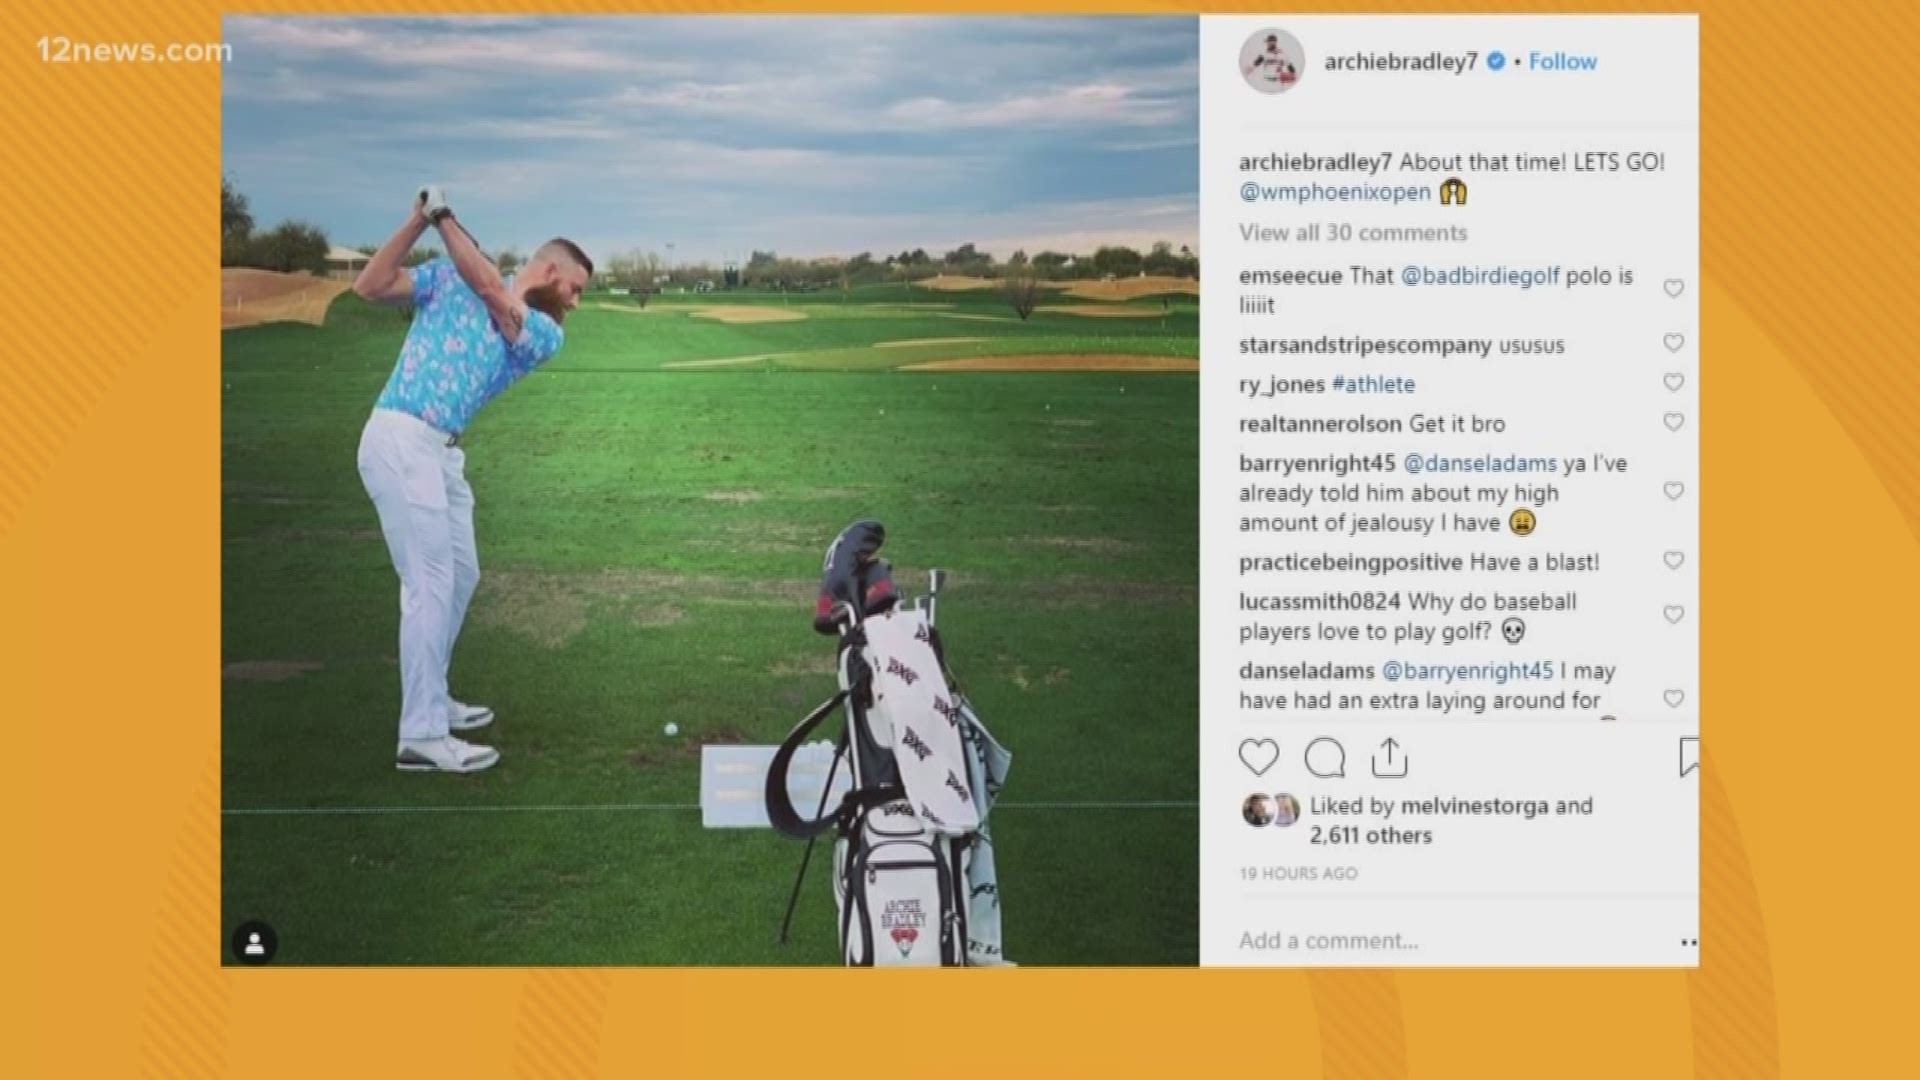 After his round at the 2019 Waste Management Phoenix Open Pro-Am, D-backs pitcher Archie Bradley shared the news that someone may have stolen his golf clubs.